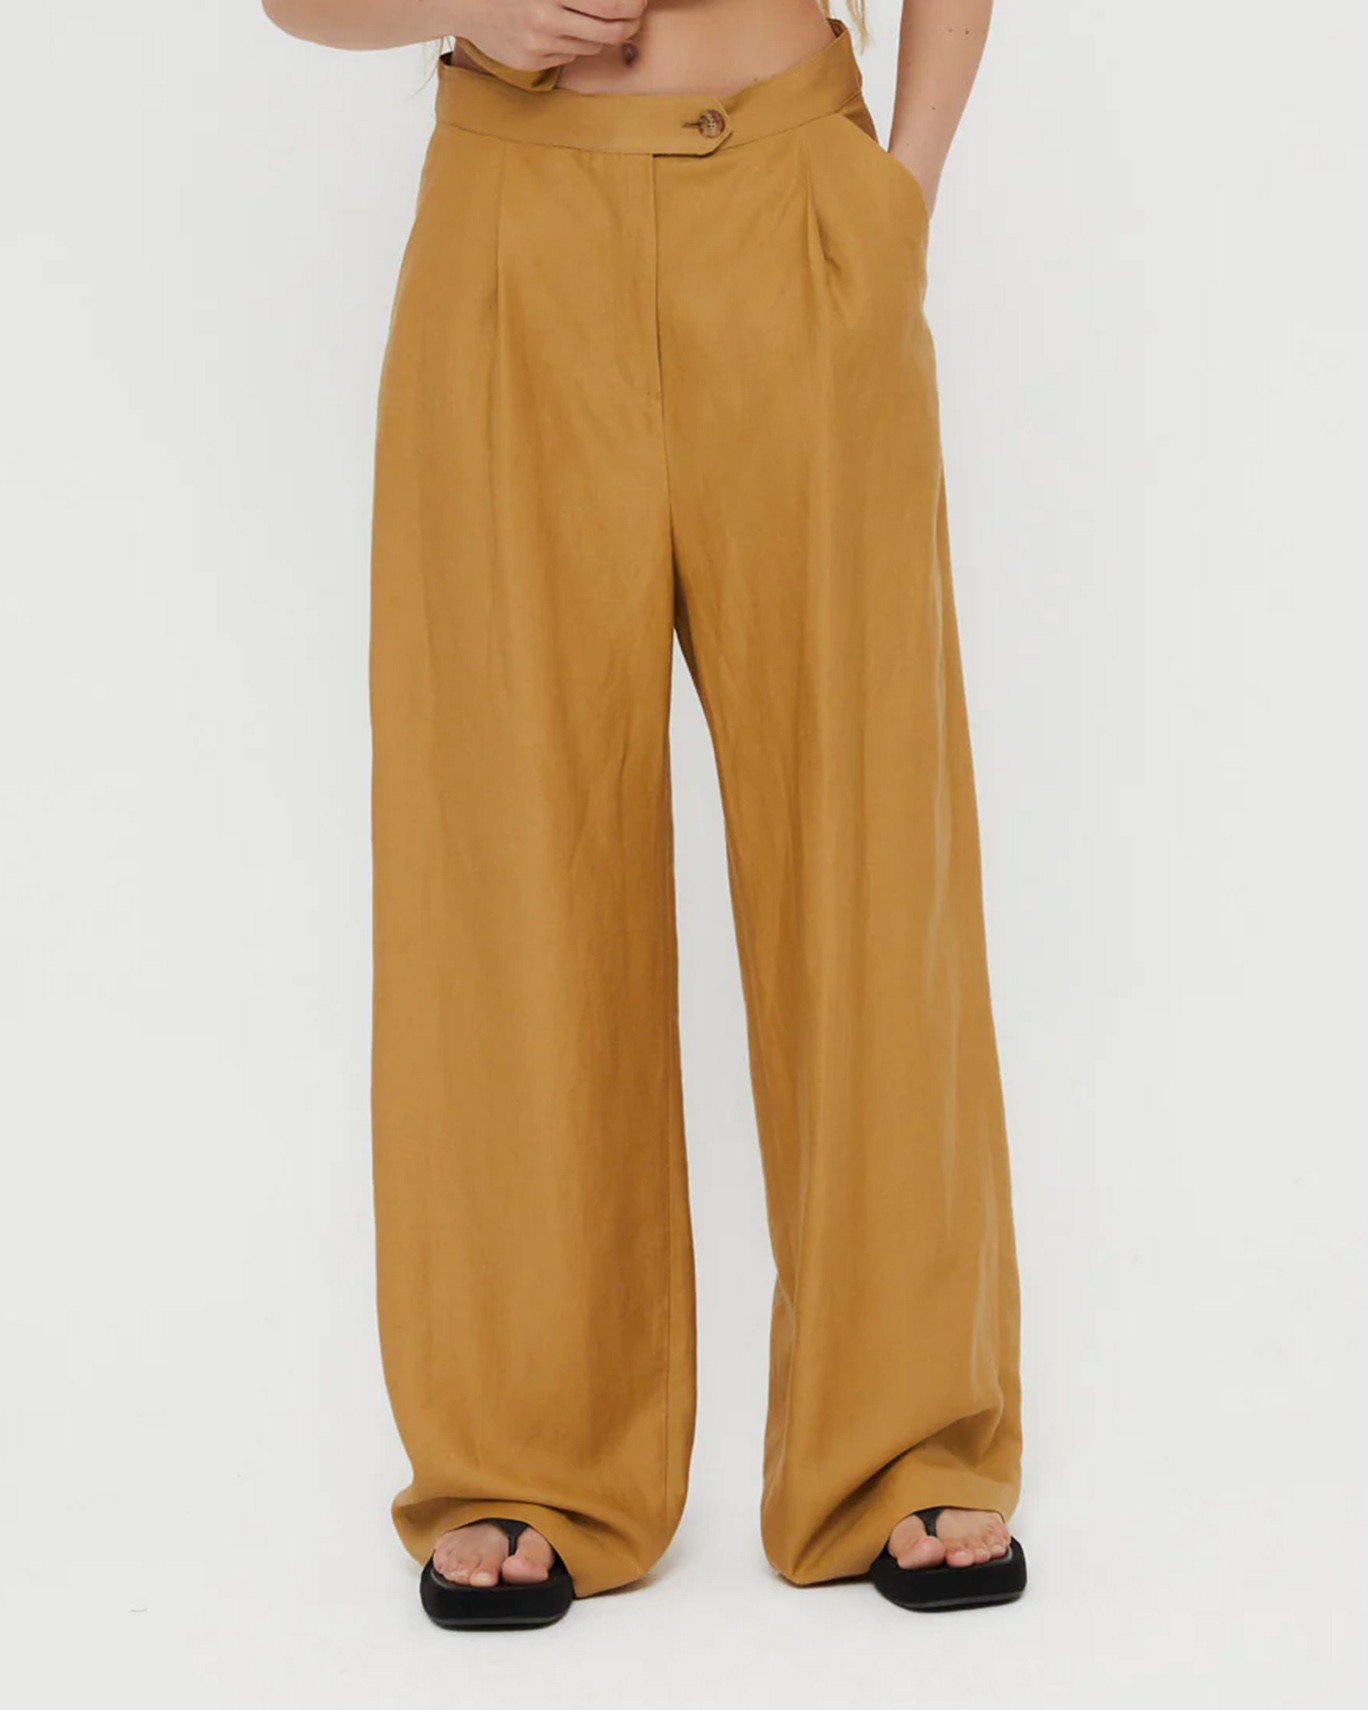 sophie-and-lucie-pantalon-woody-lino